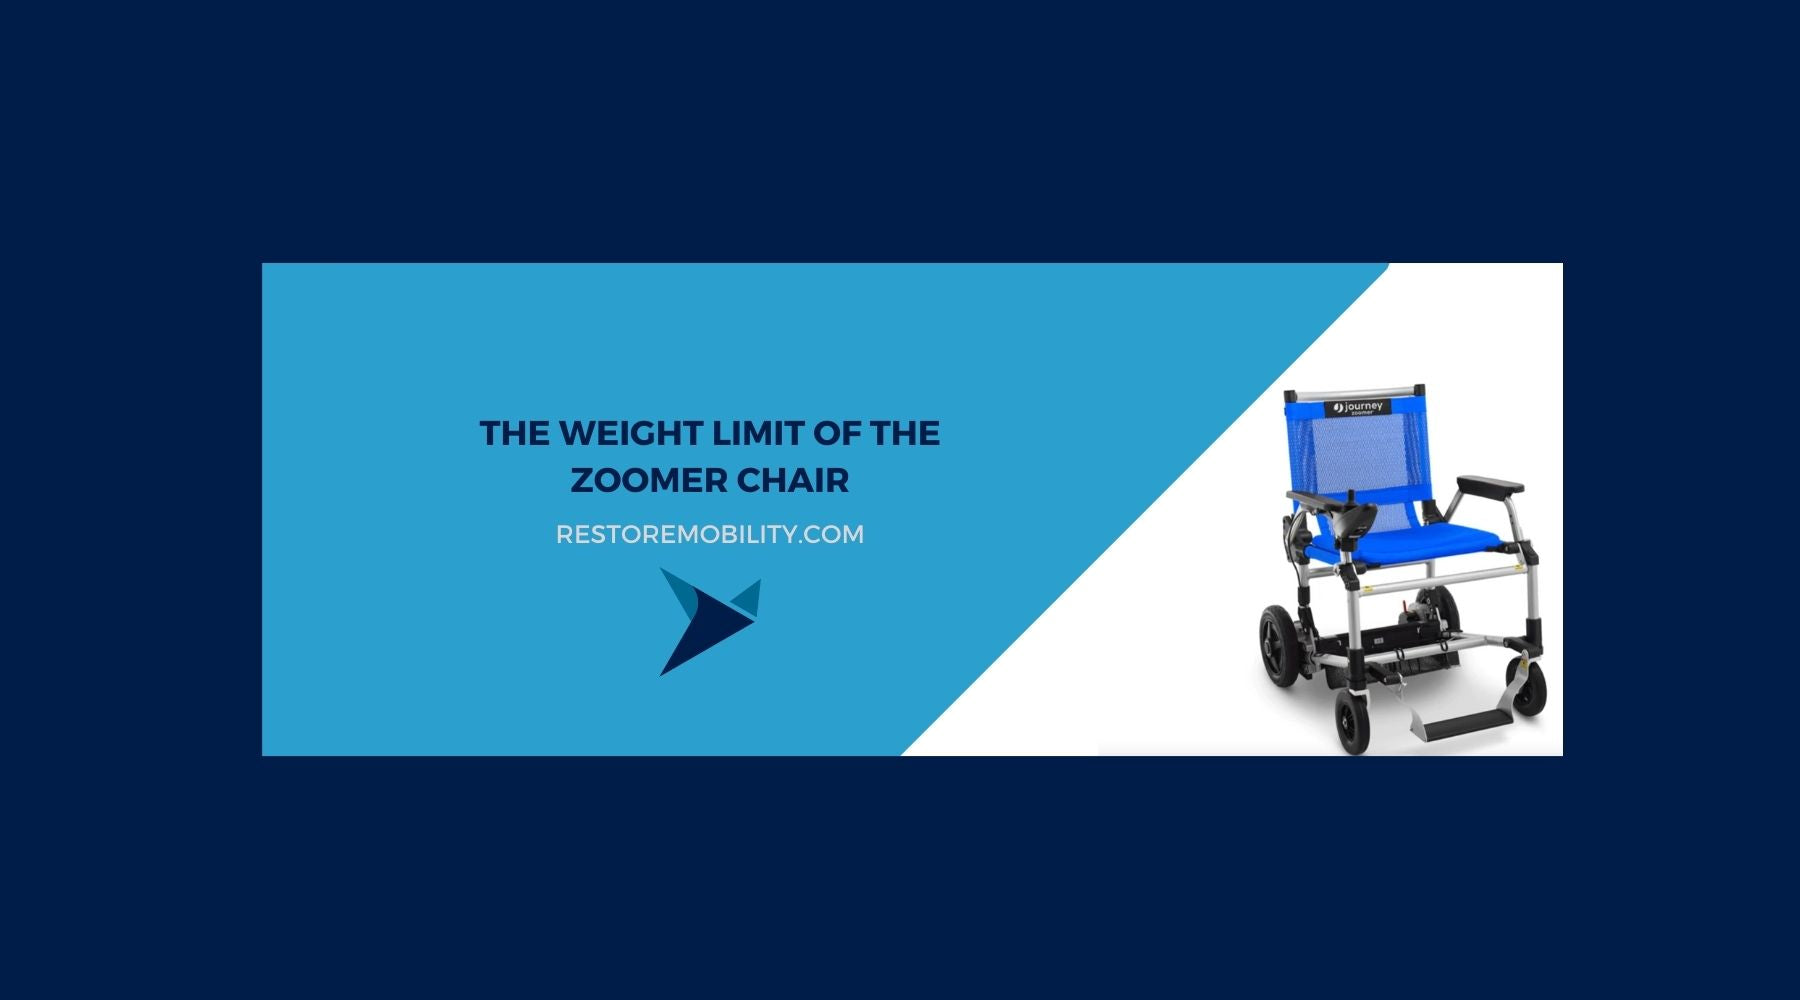 The Weight Limit of the Zoomer Chair by Journey